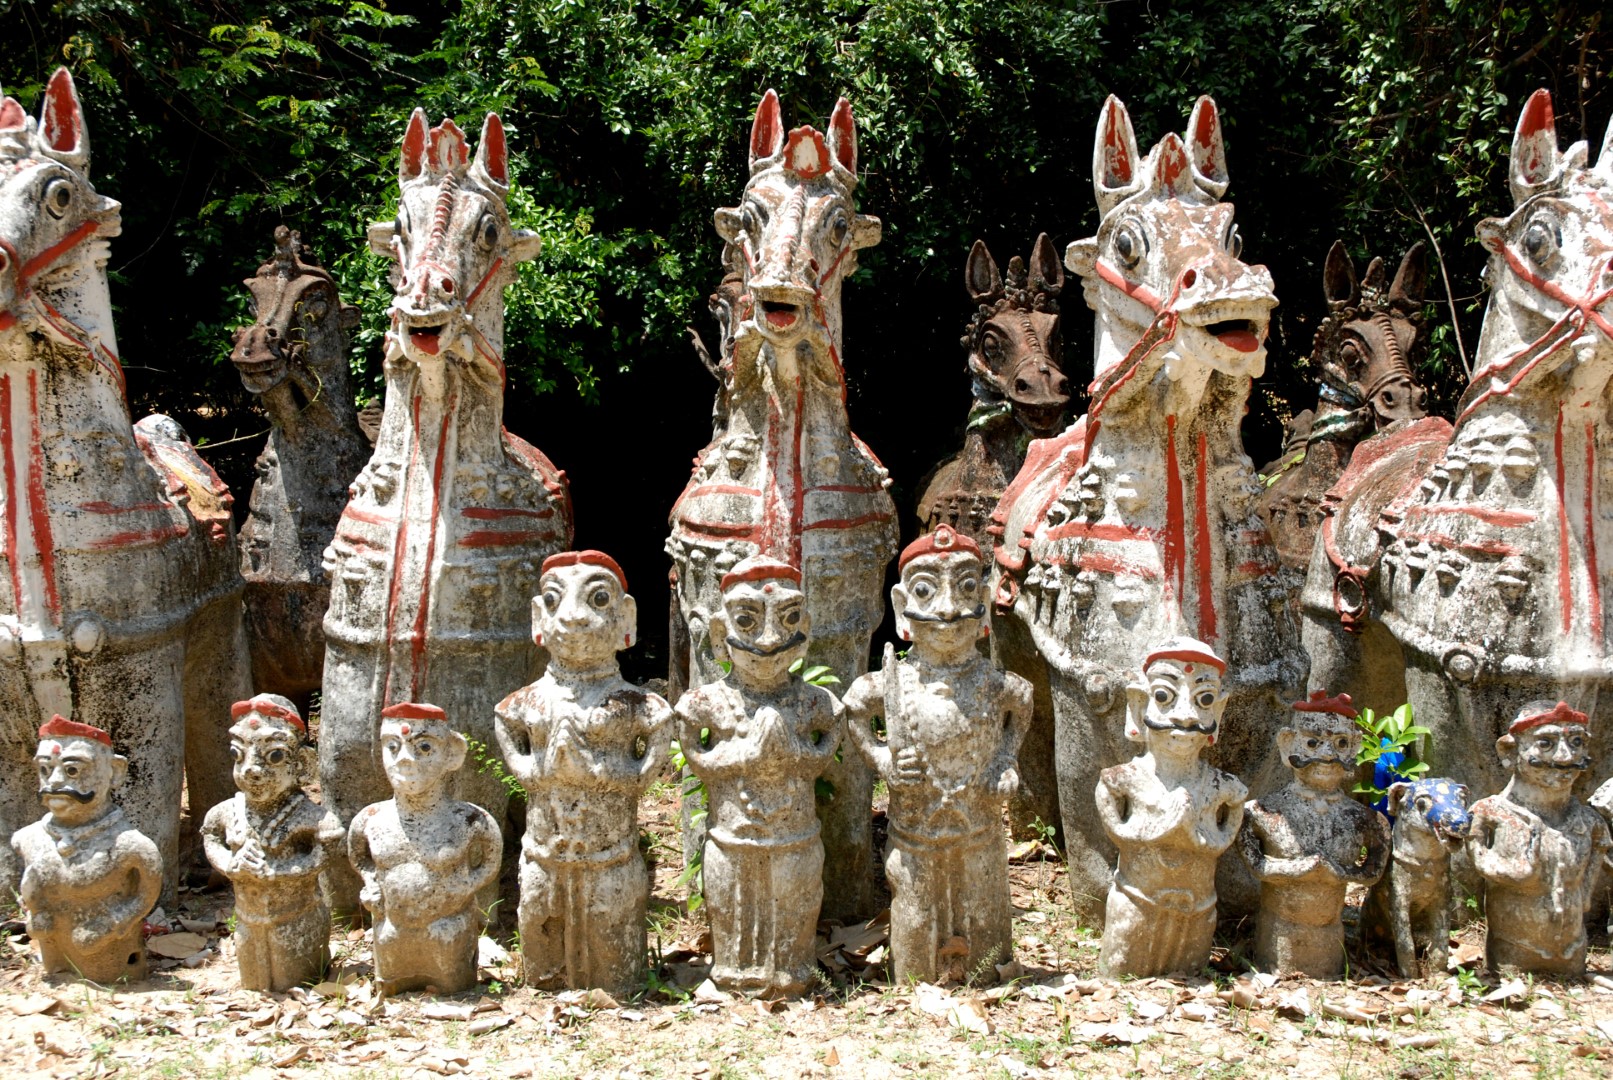 <span style="font-weight:normal;">This shrine is located about ten kilometres from the sea (the Bay of Bangal). The older statues are coated with a fine layer of sand.</span>